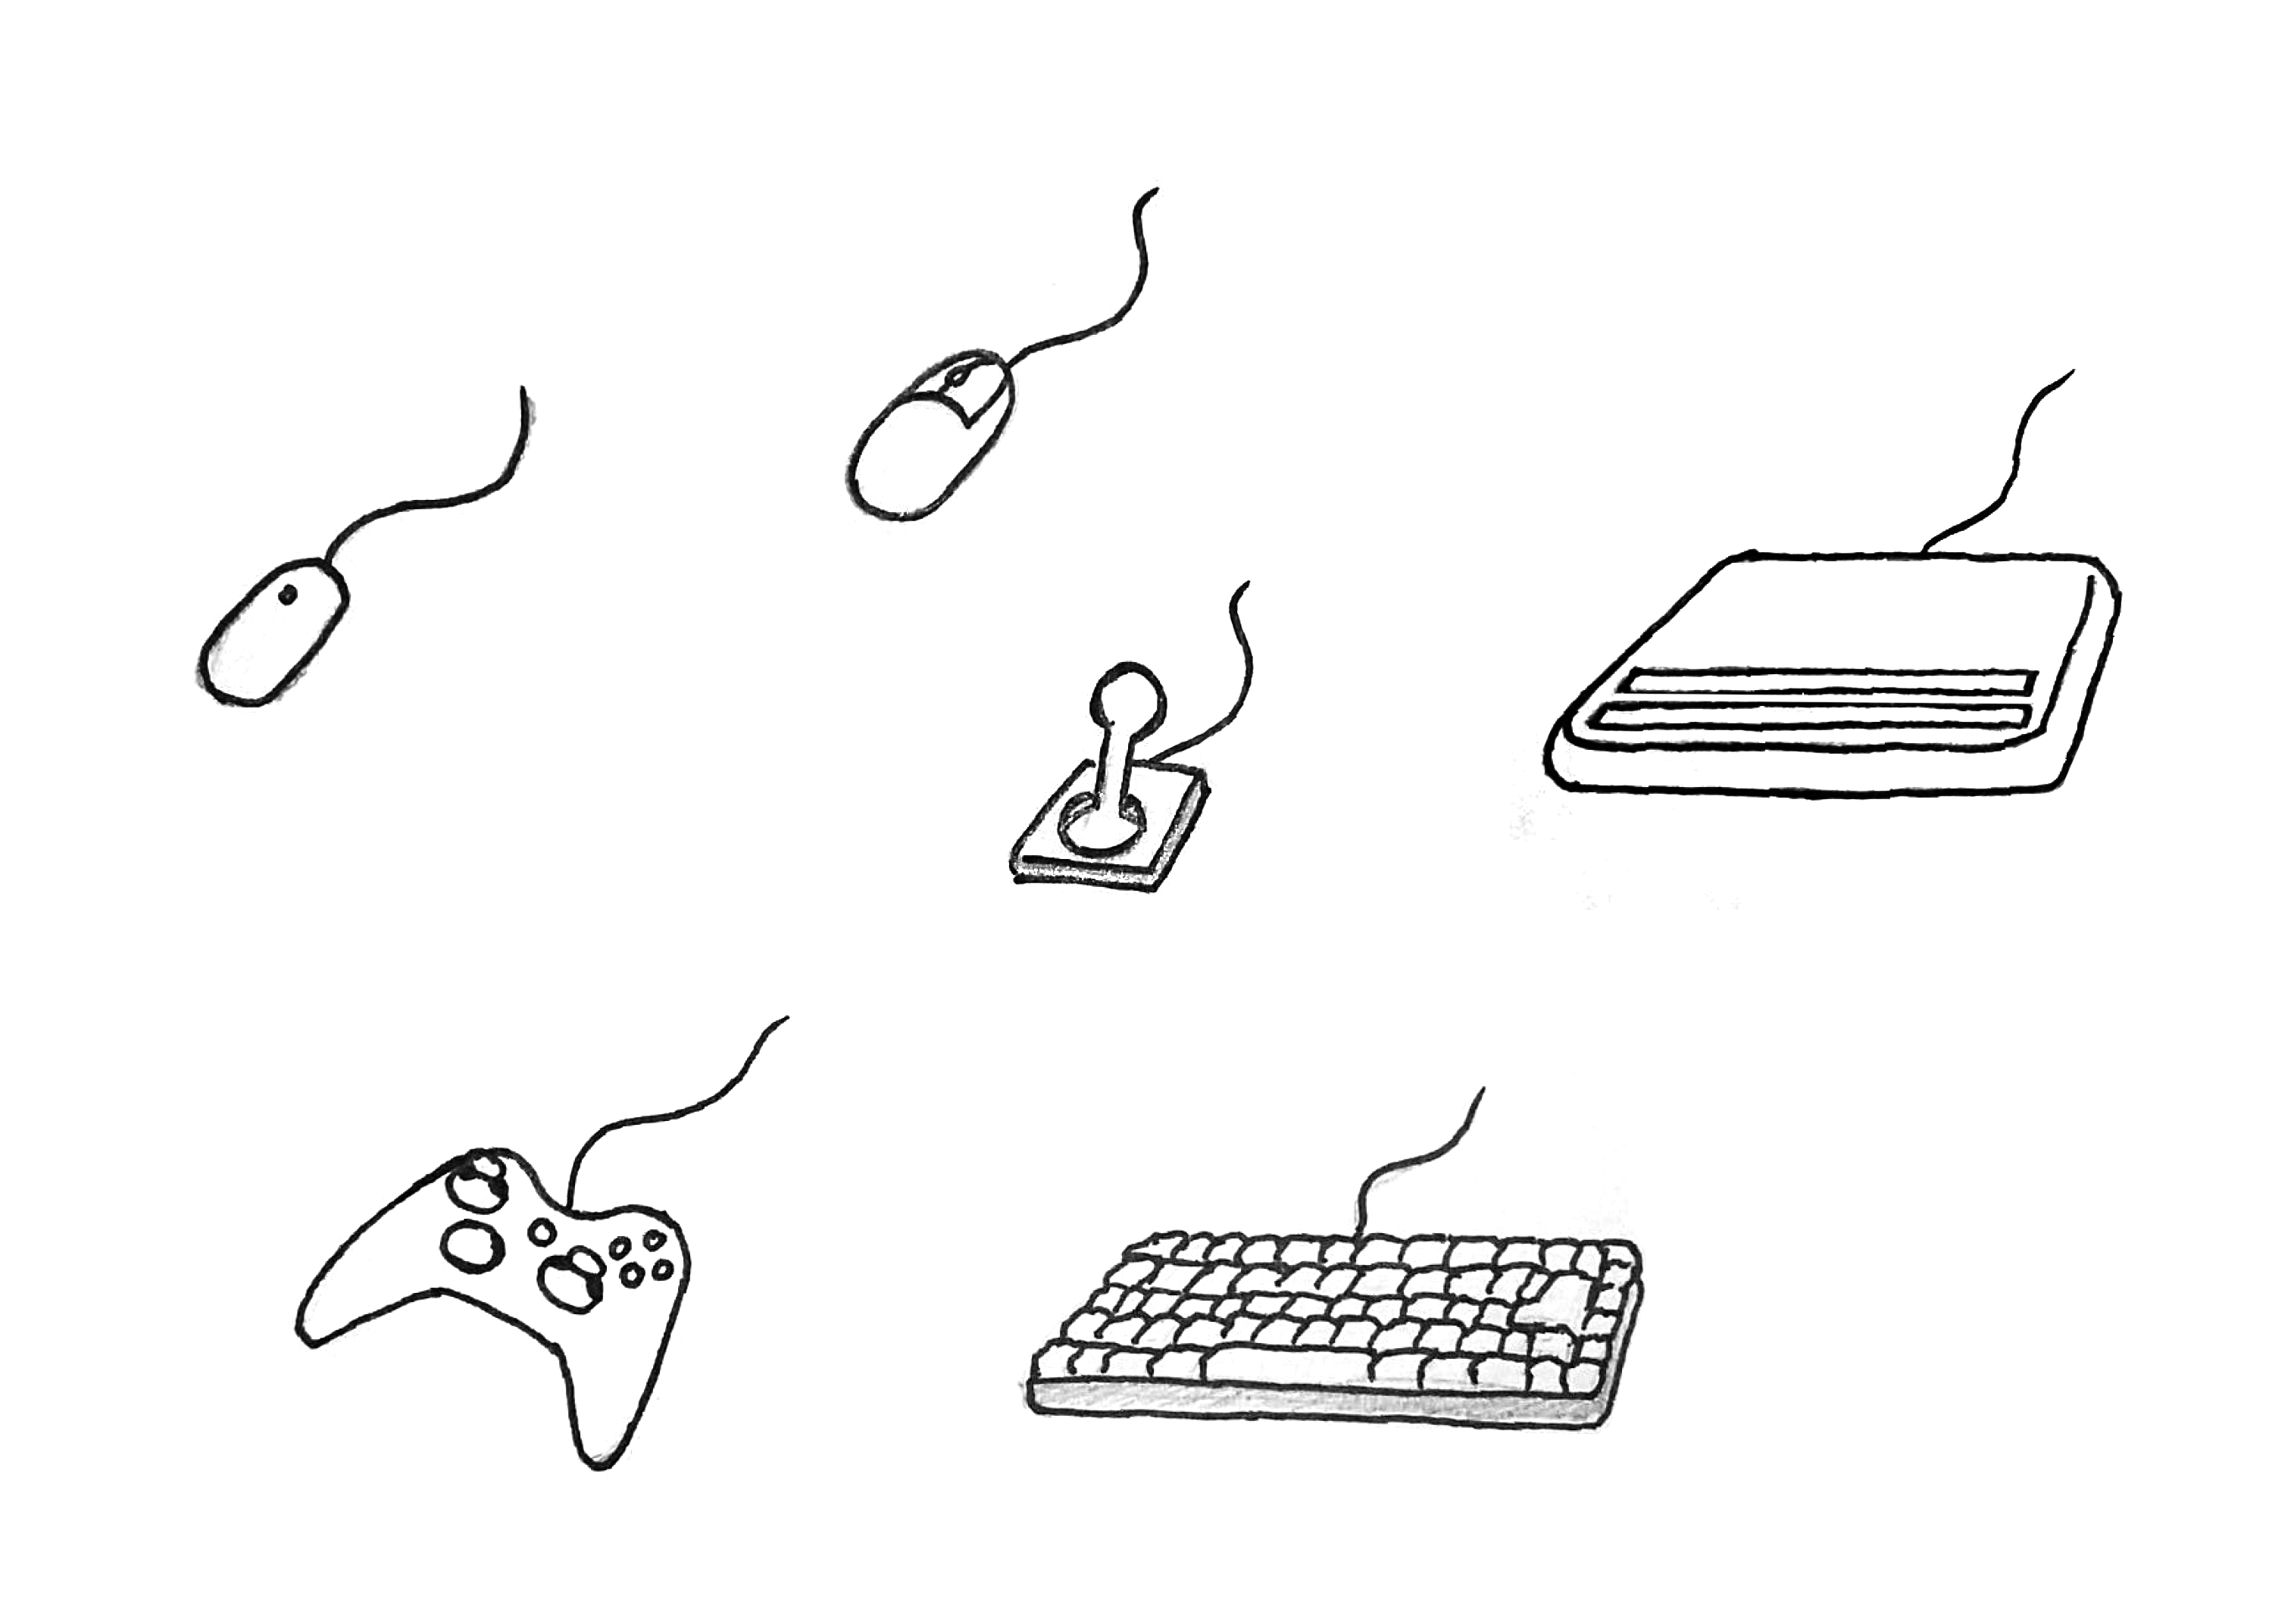 Illustration: 2 different mouses, a keyboard, a refreshable braille display, a gamepad and a joystick.